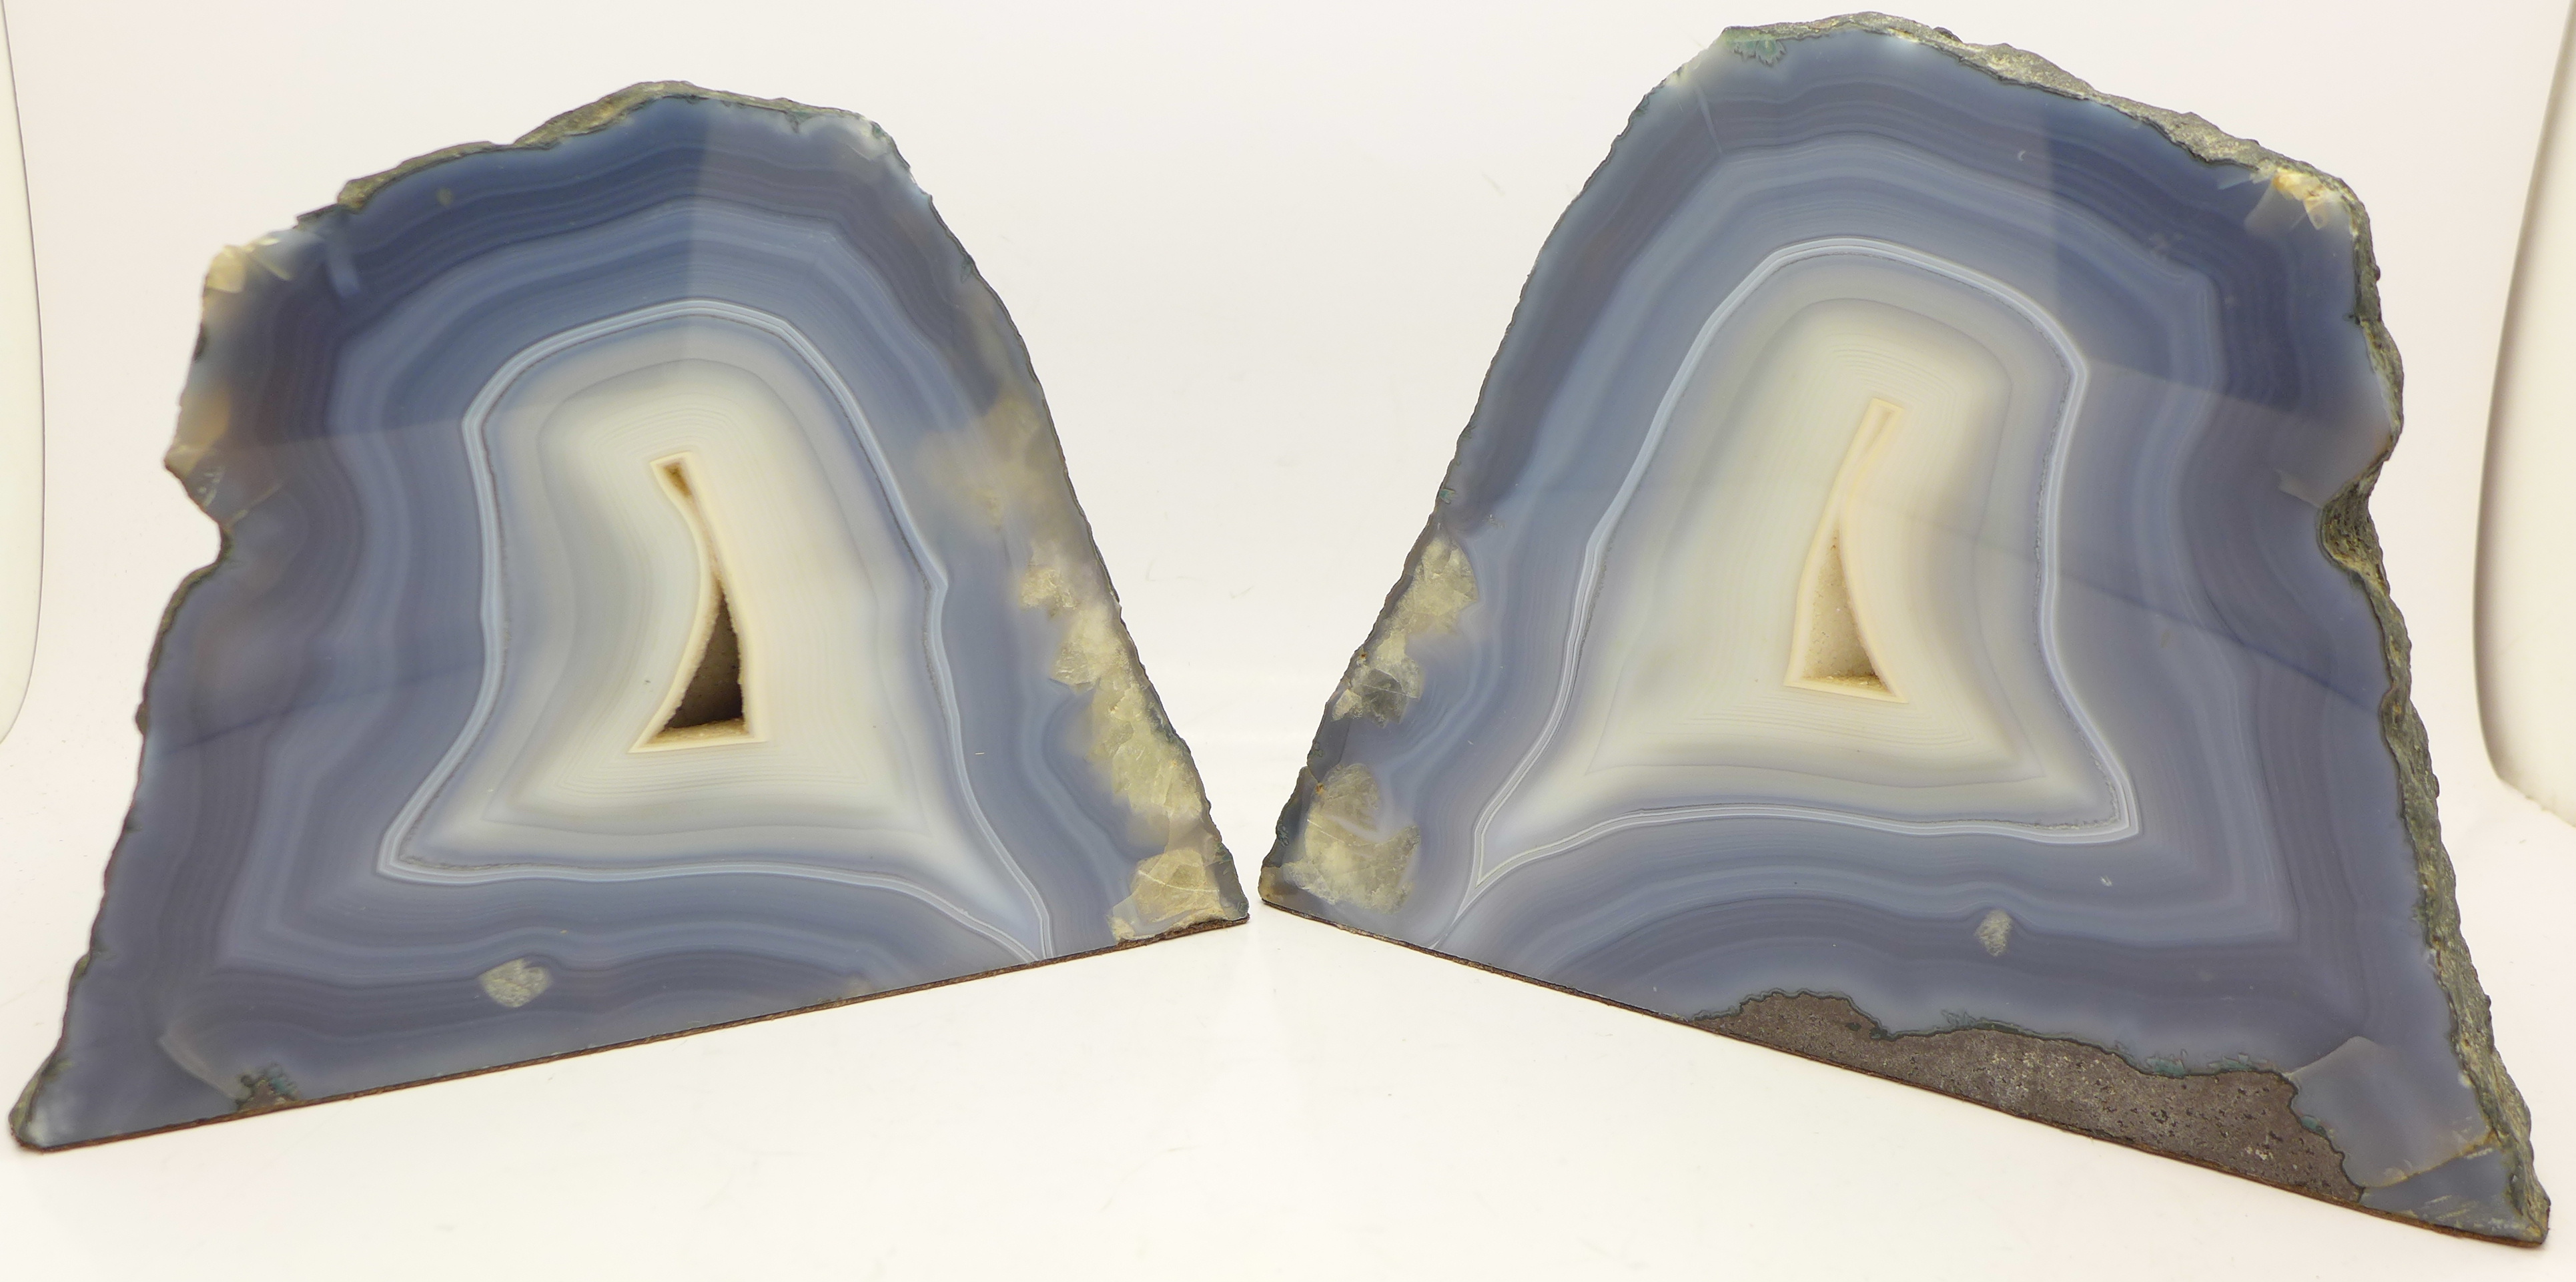 A pair of mineral sample geode bookends, 5.